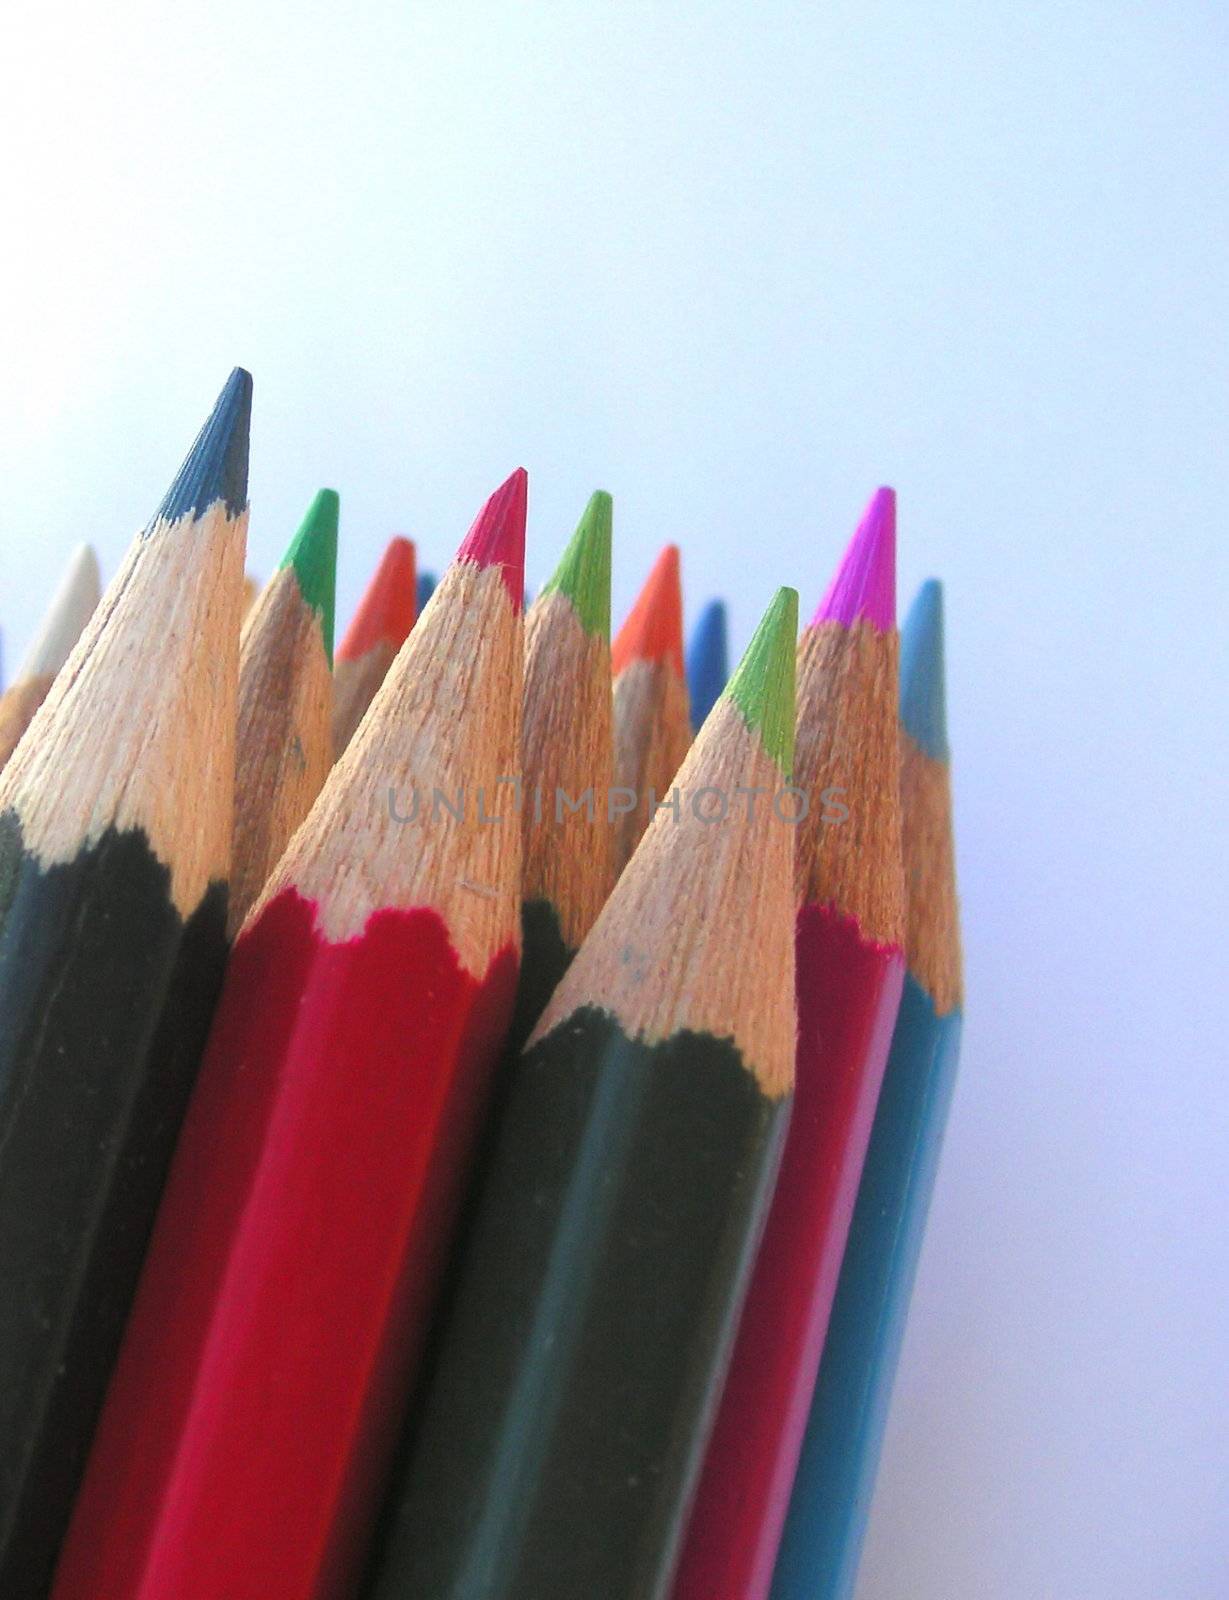 pencil crayons against a blue background